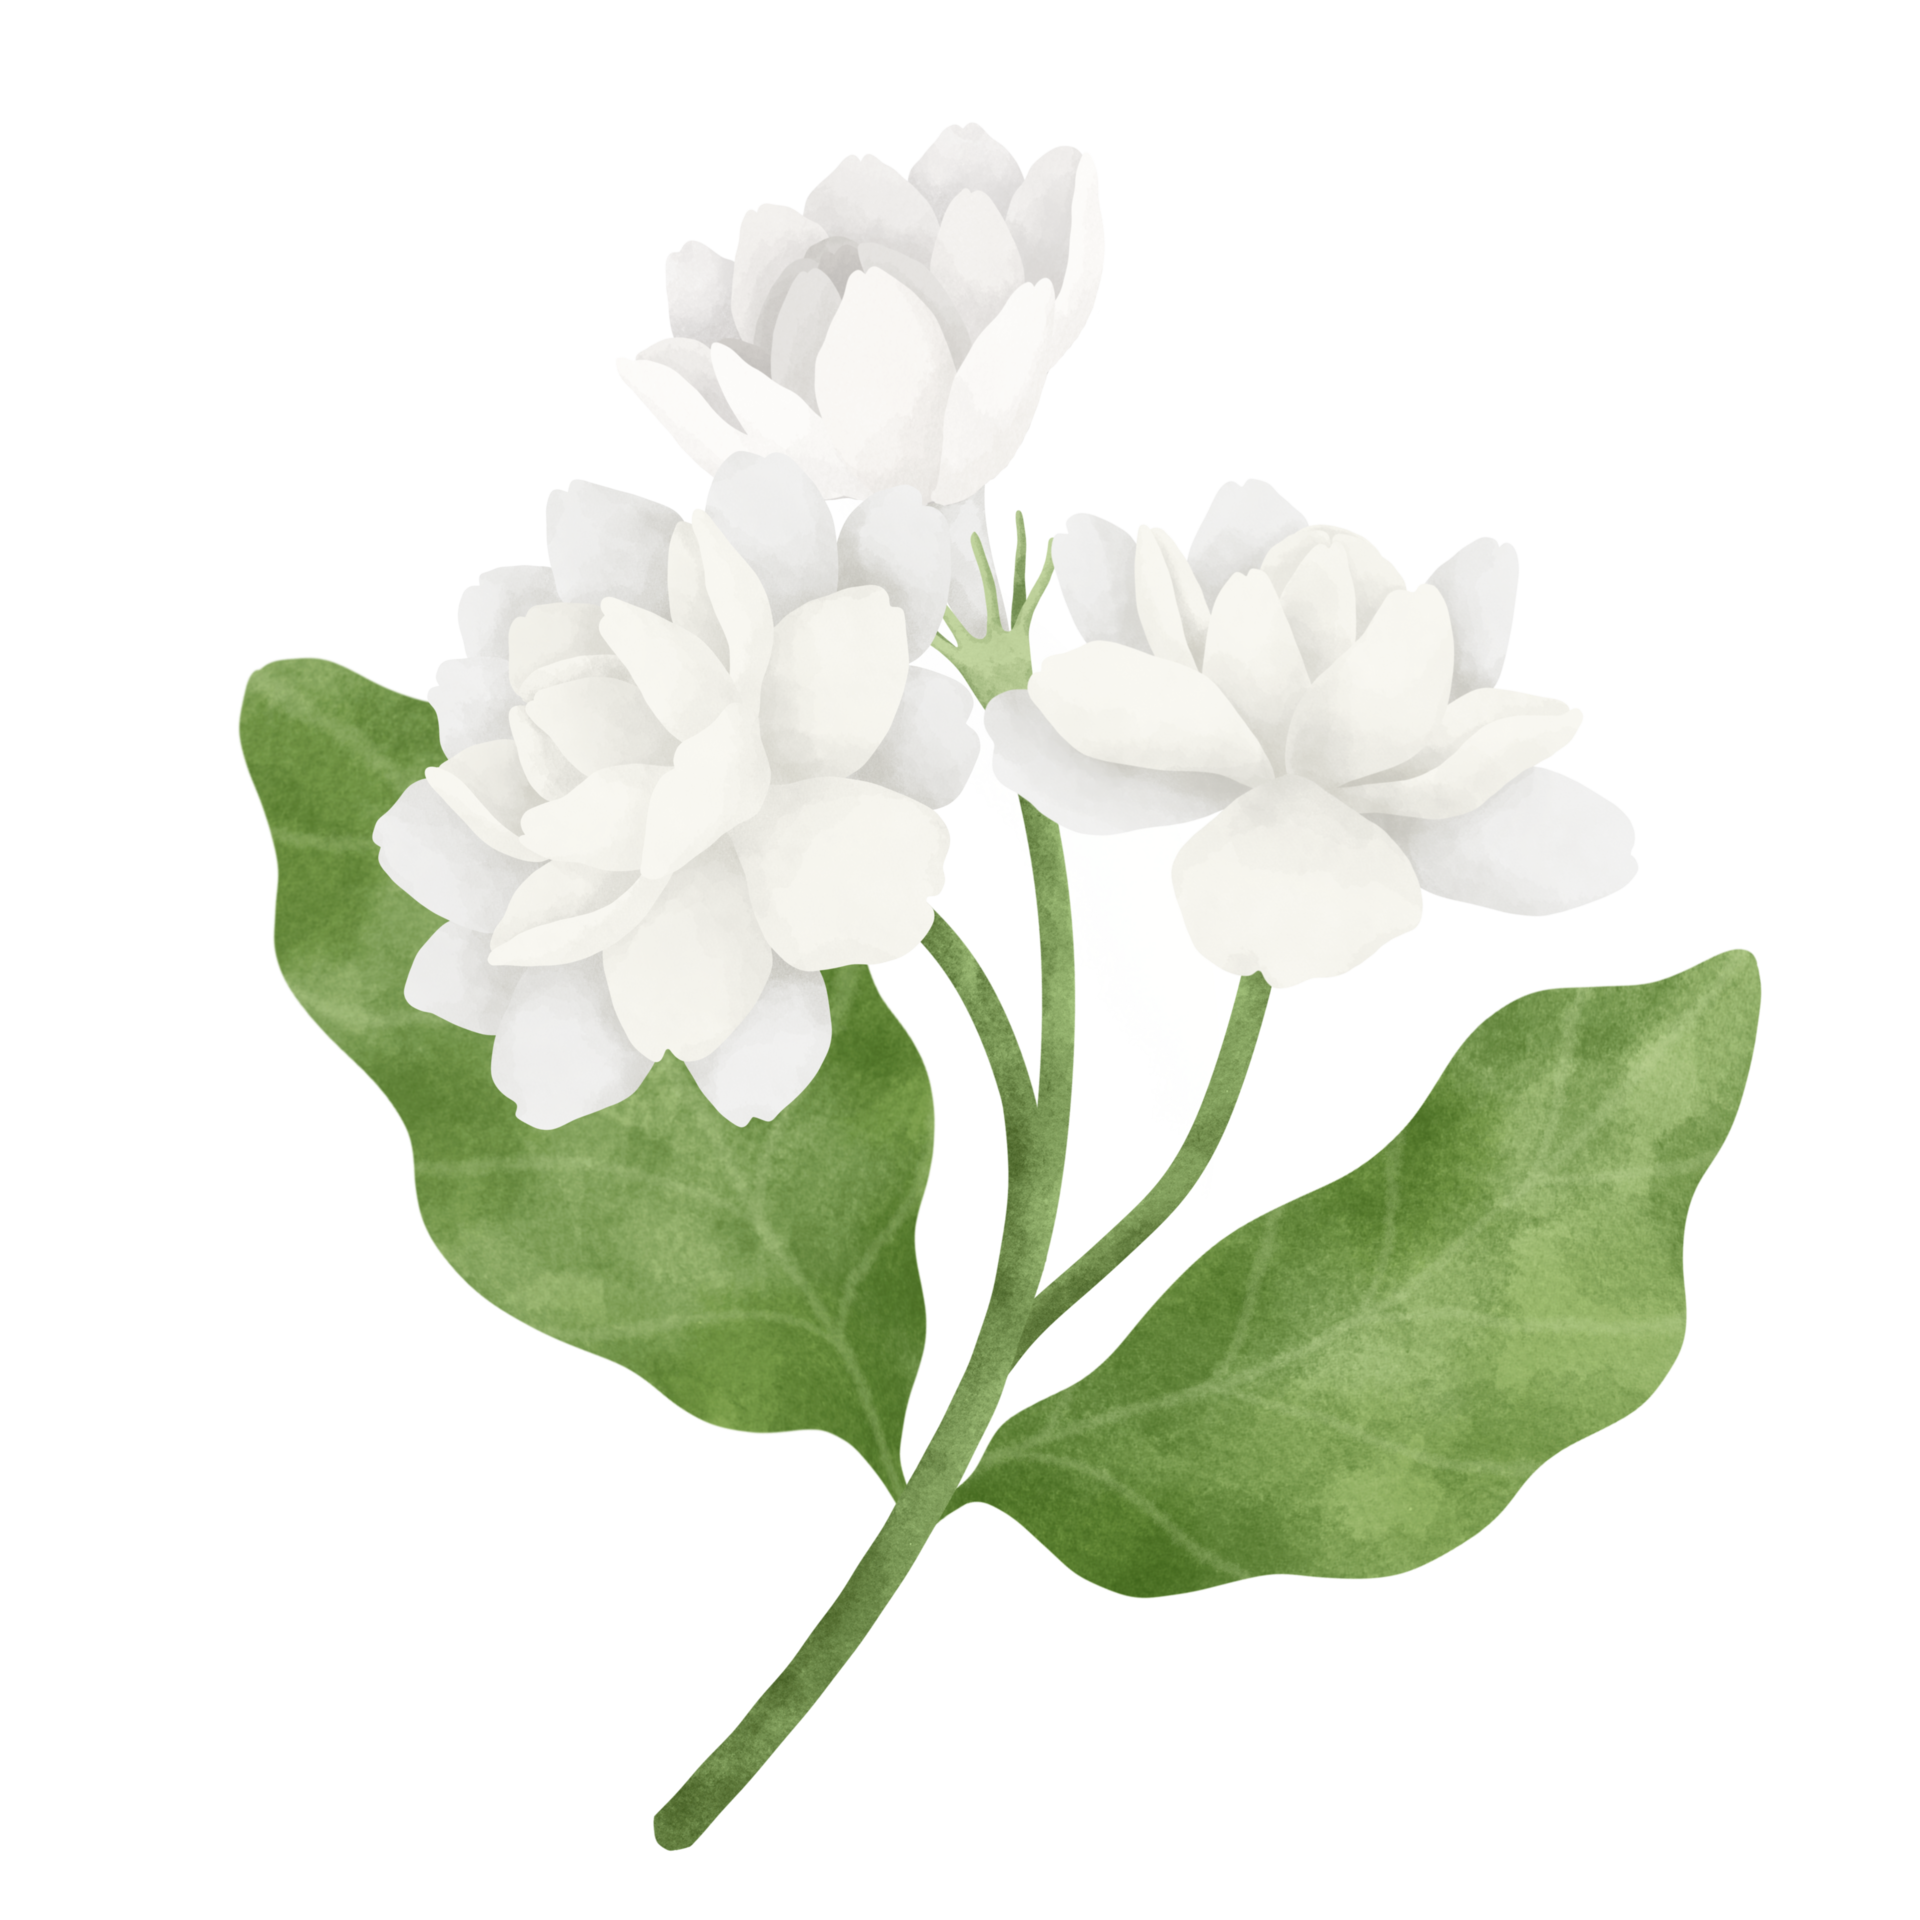 Download Explore Both The Symbolism And Power Of Roses And Jasmine - Jasmine  Flower Drawing PNG Image with No Background - PNGkey.com